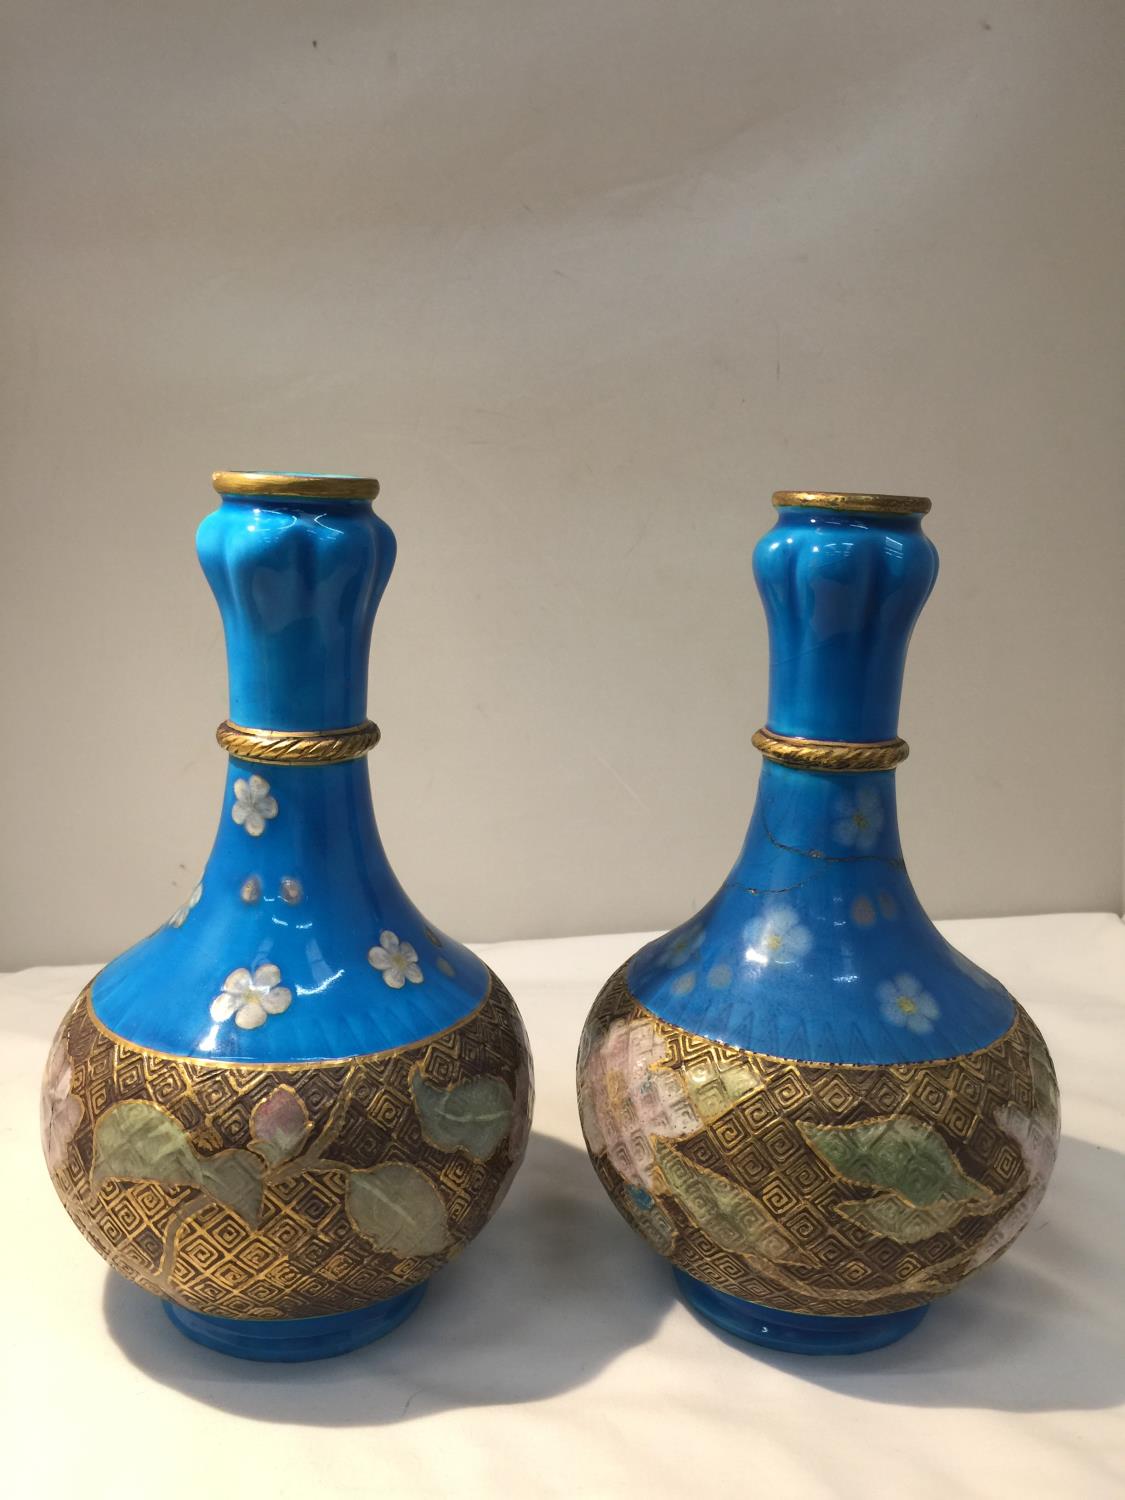 A PAIR OF MINTON CHRISTOPHER DRESSER DESIGN VASES, A/F - BOTH HAVE HAD EXTENSIVE REPAIRS